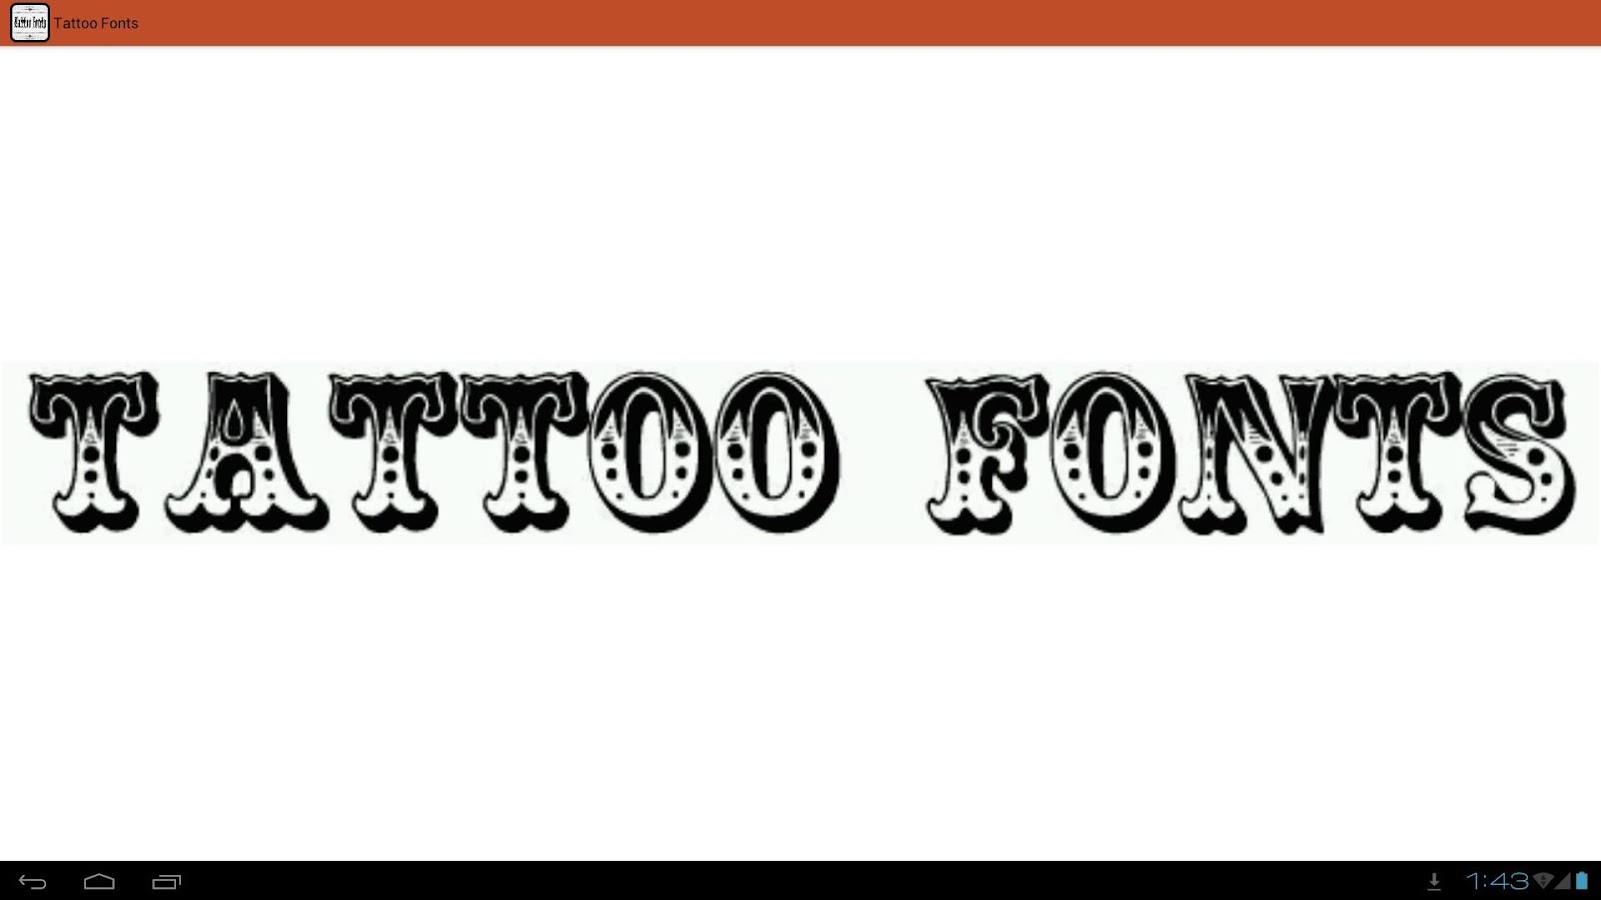 Tattoo Fonts Ideas - Android Apps on Google Play